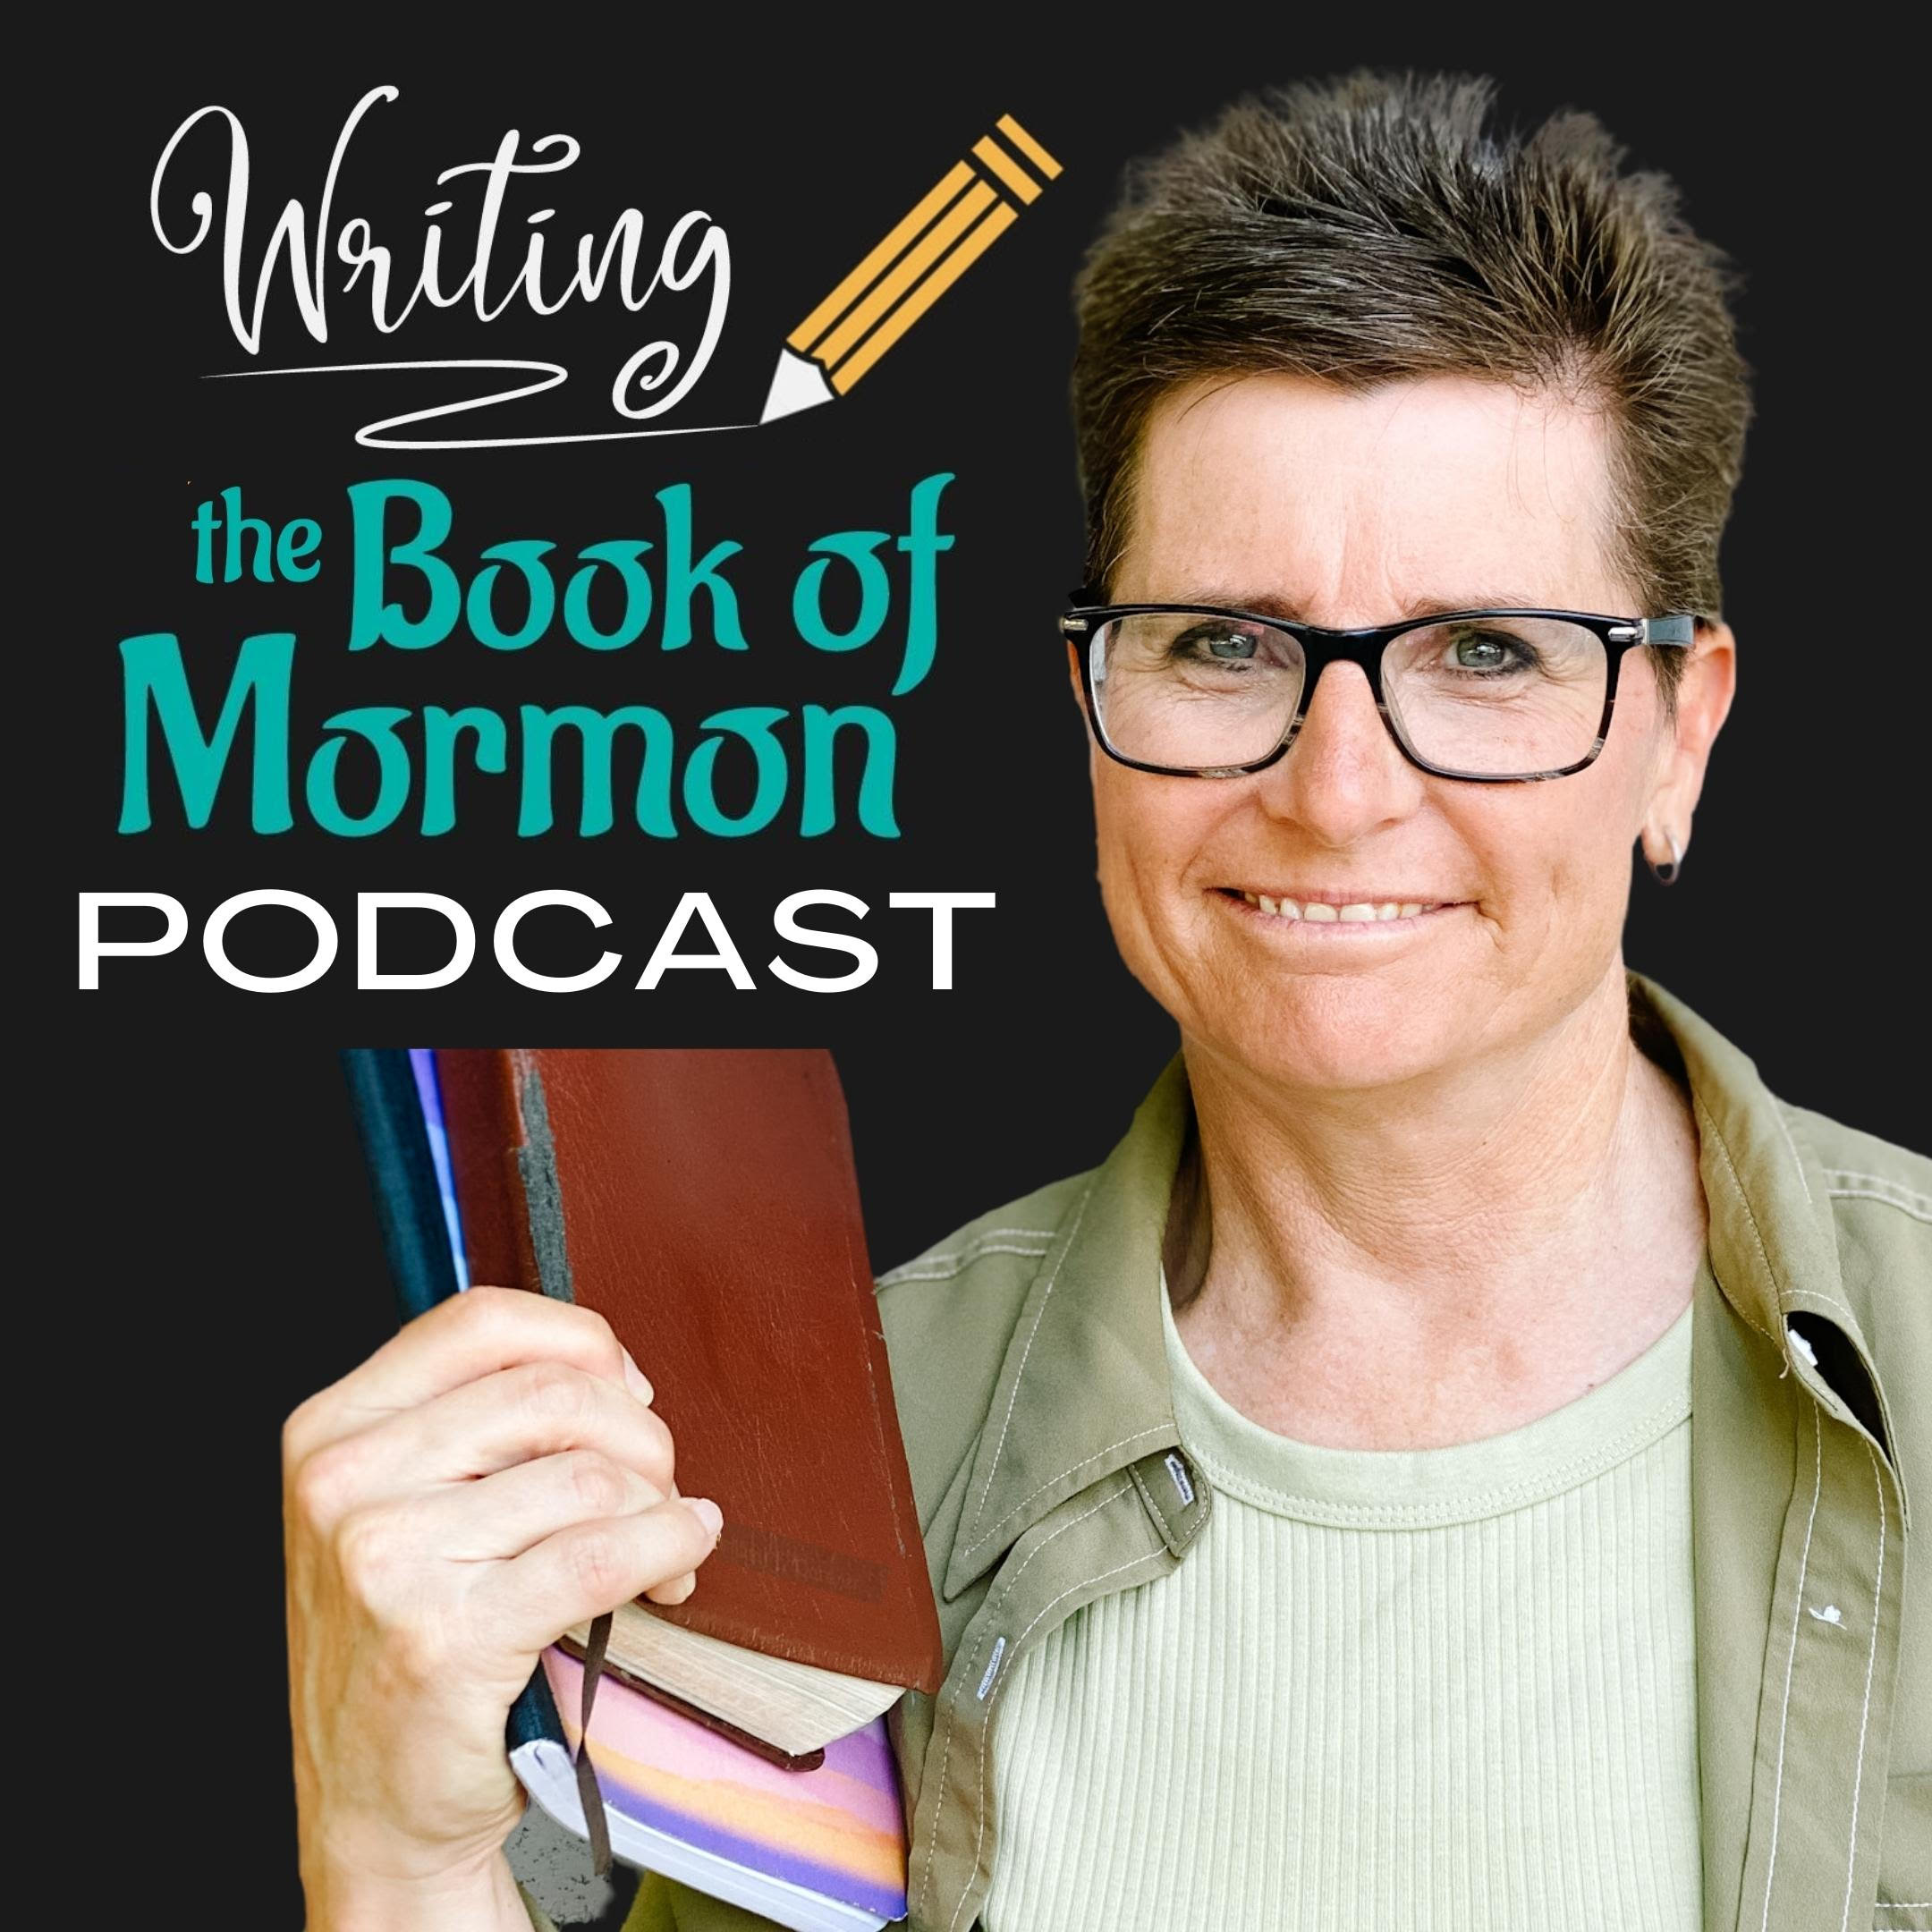 Writing the Book of Mormon Podcast